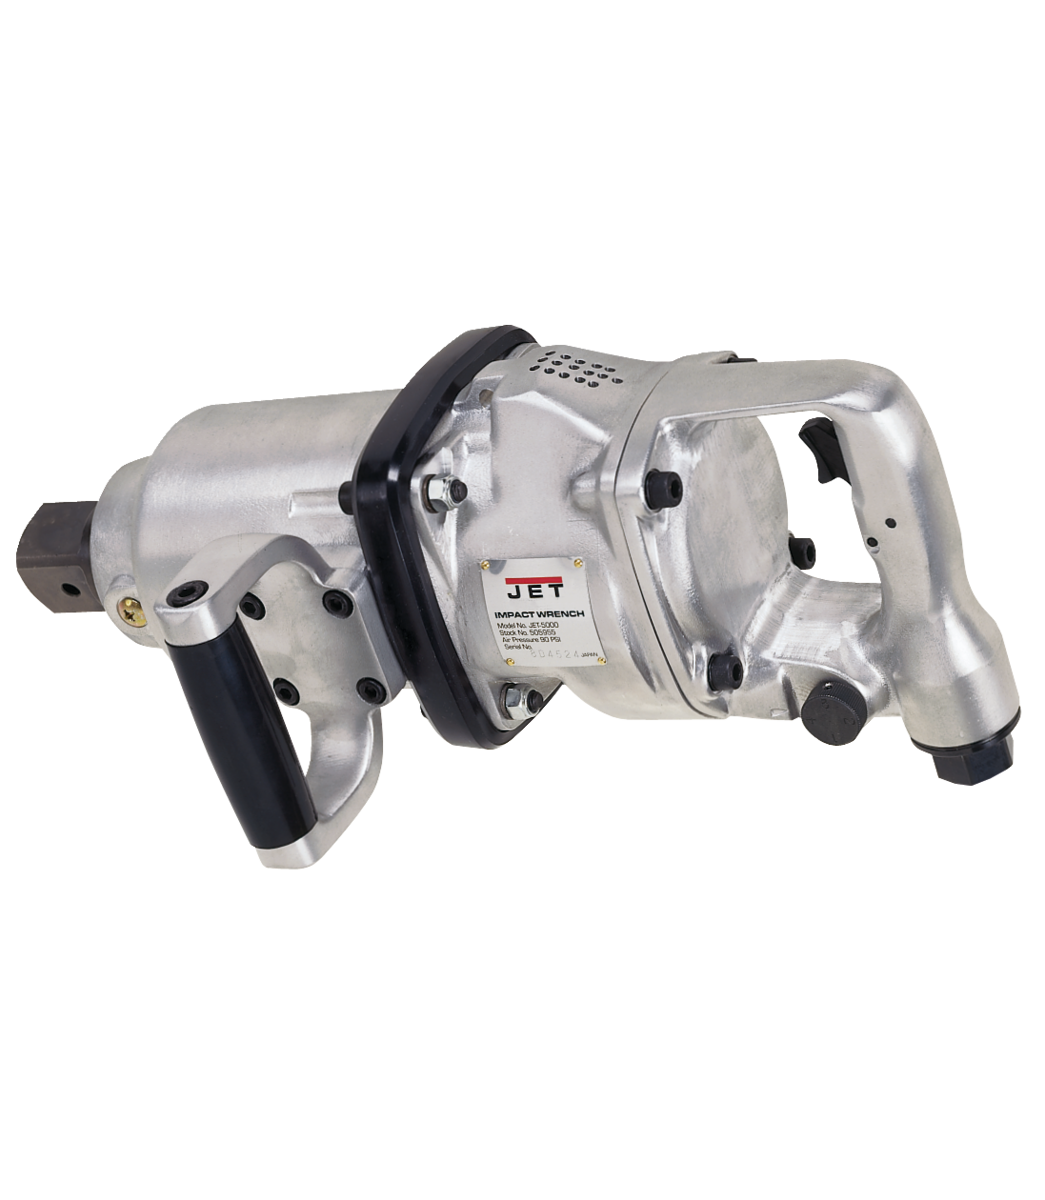 JET 1-1/2" D-Handle Impact Wrench